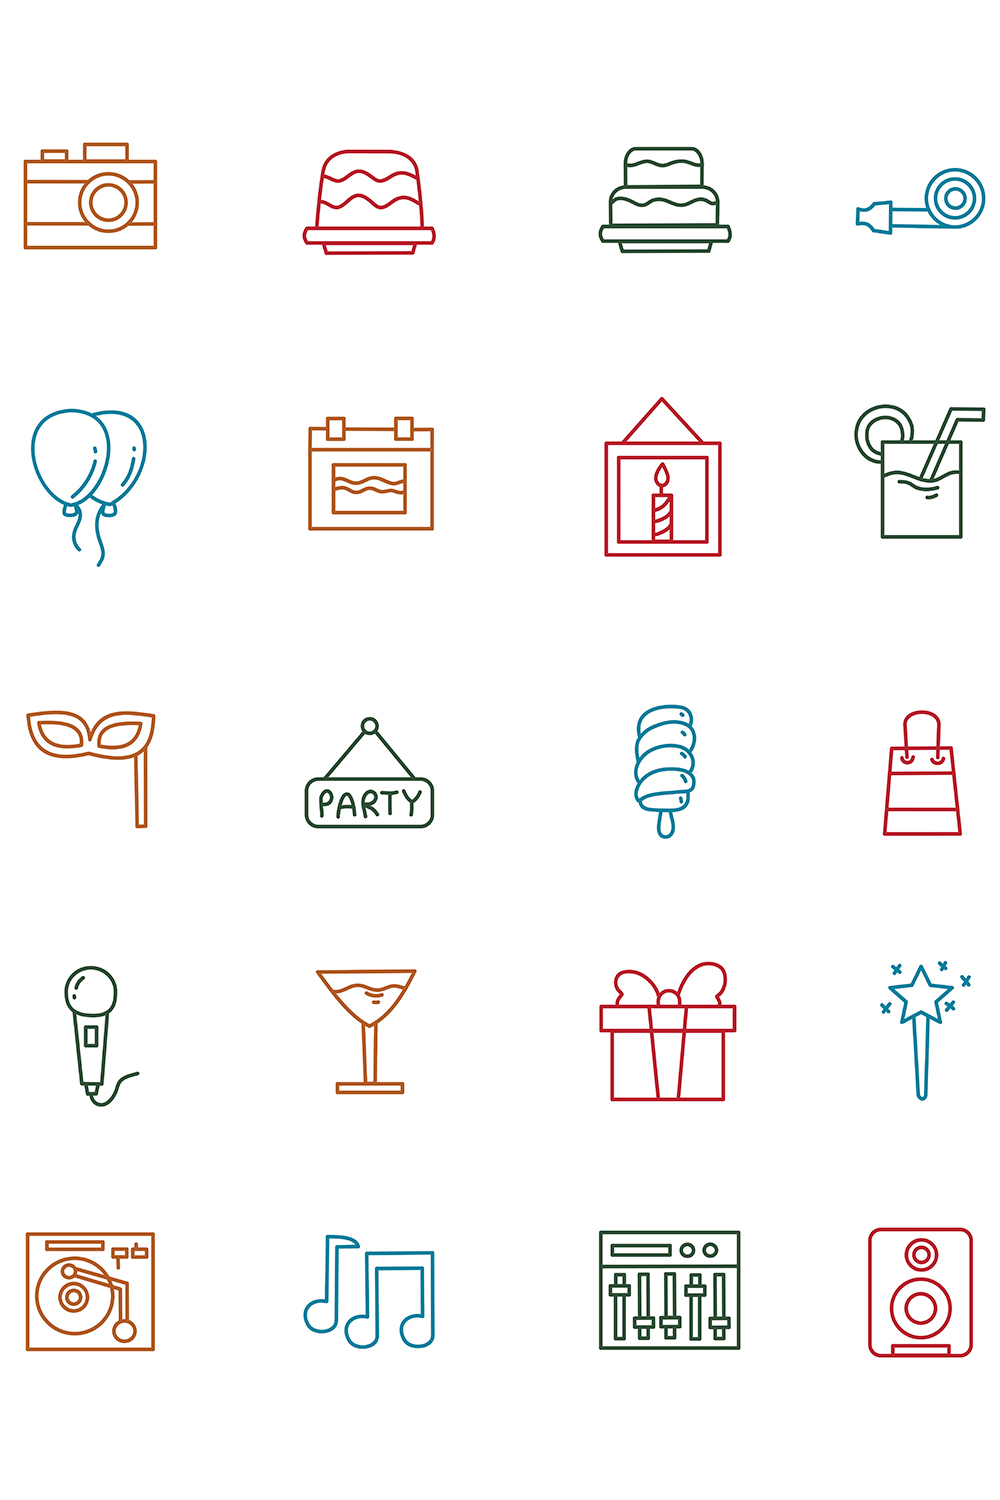 Bunch of different colored icons on a white background.